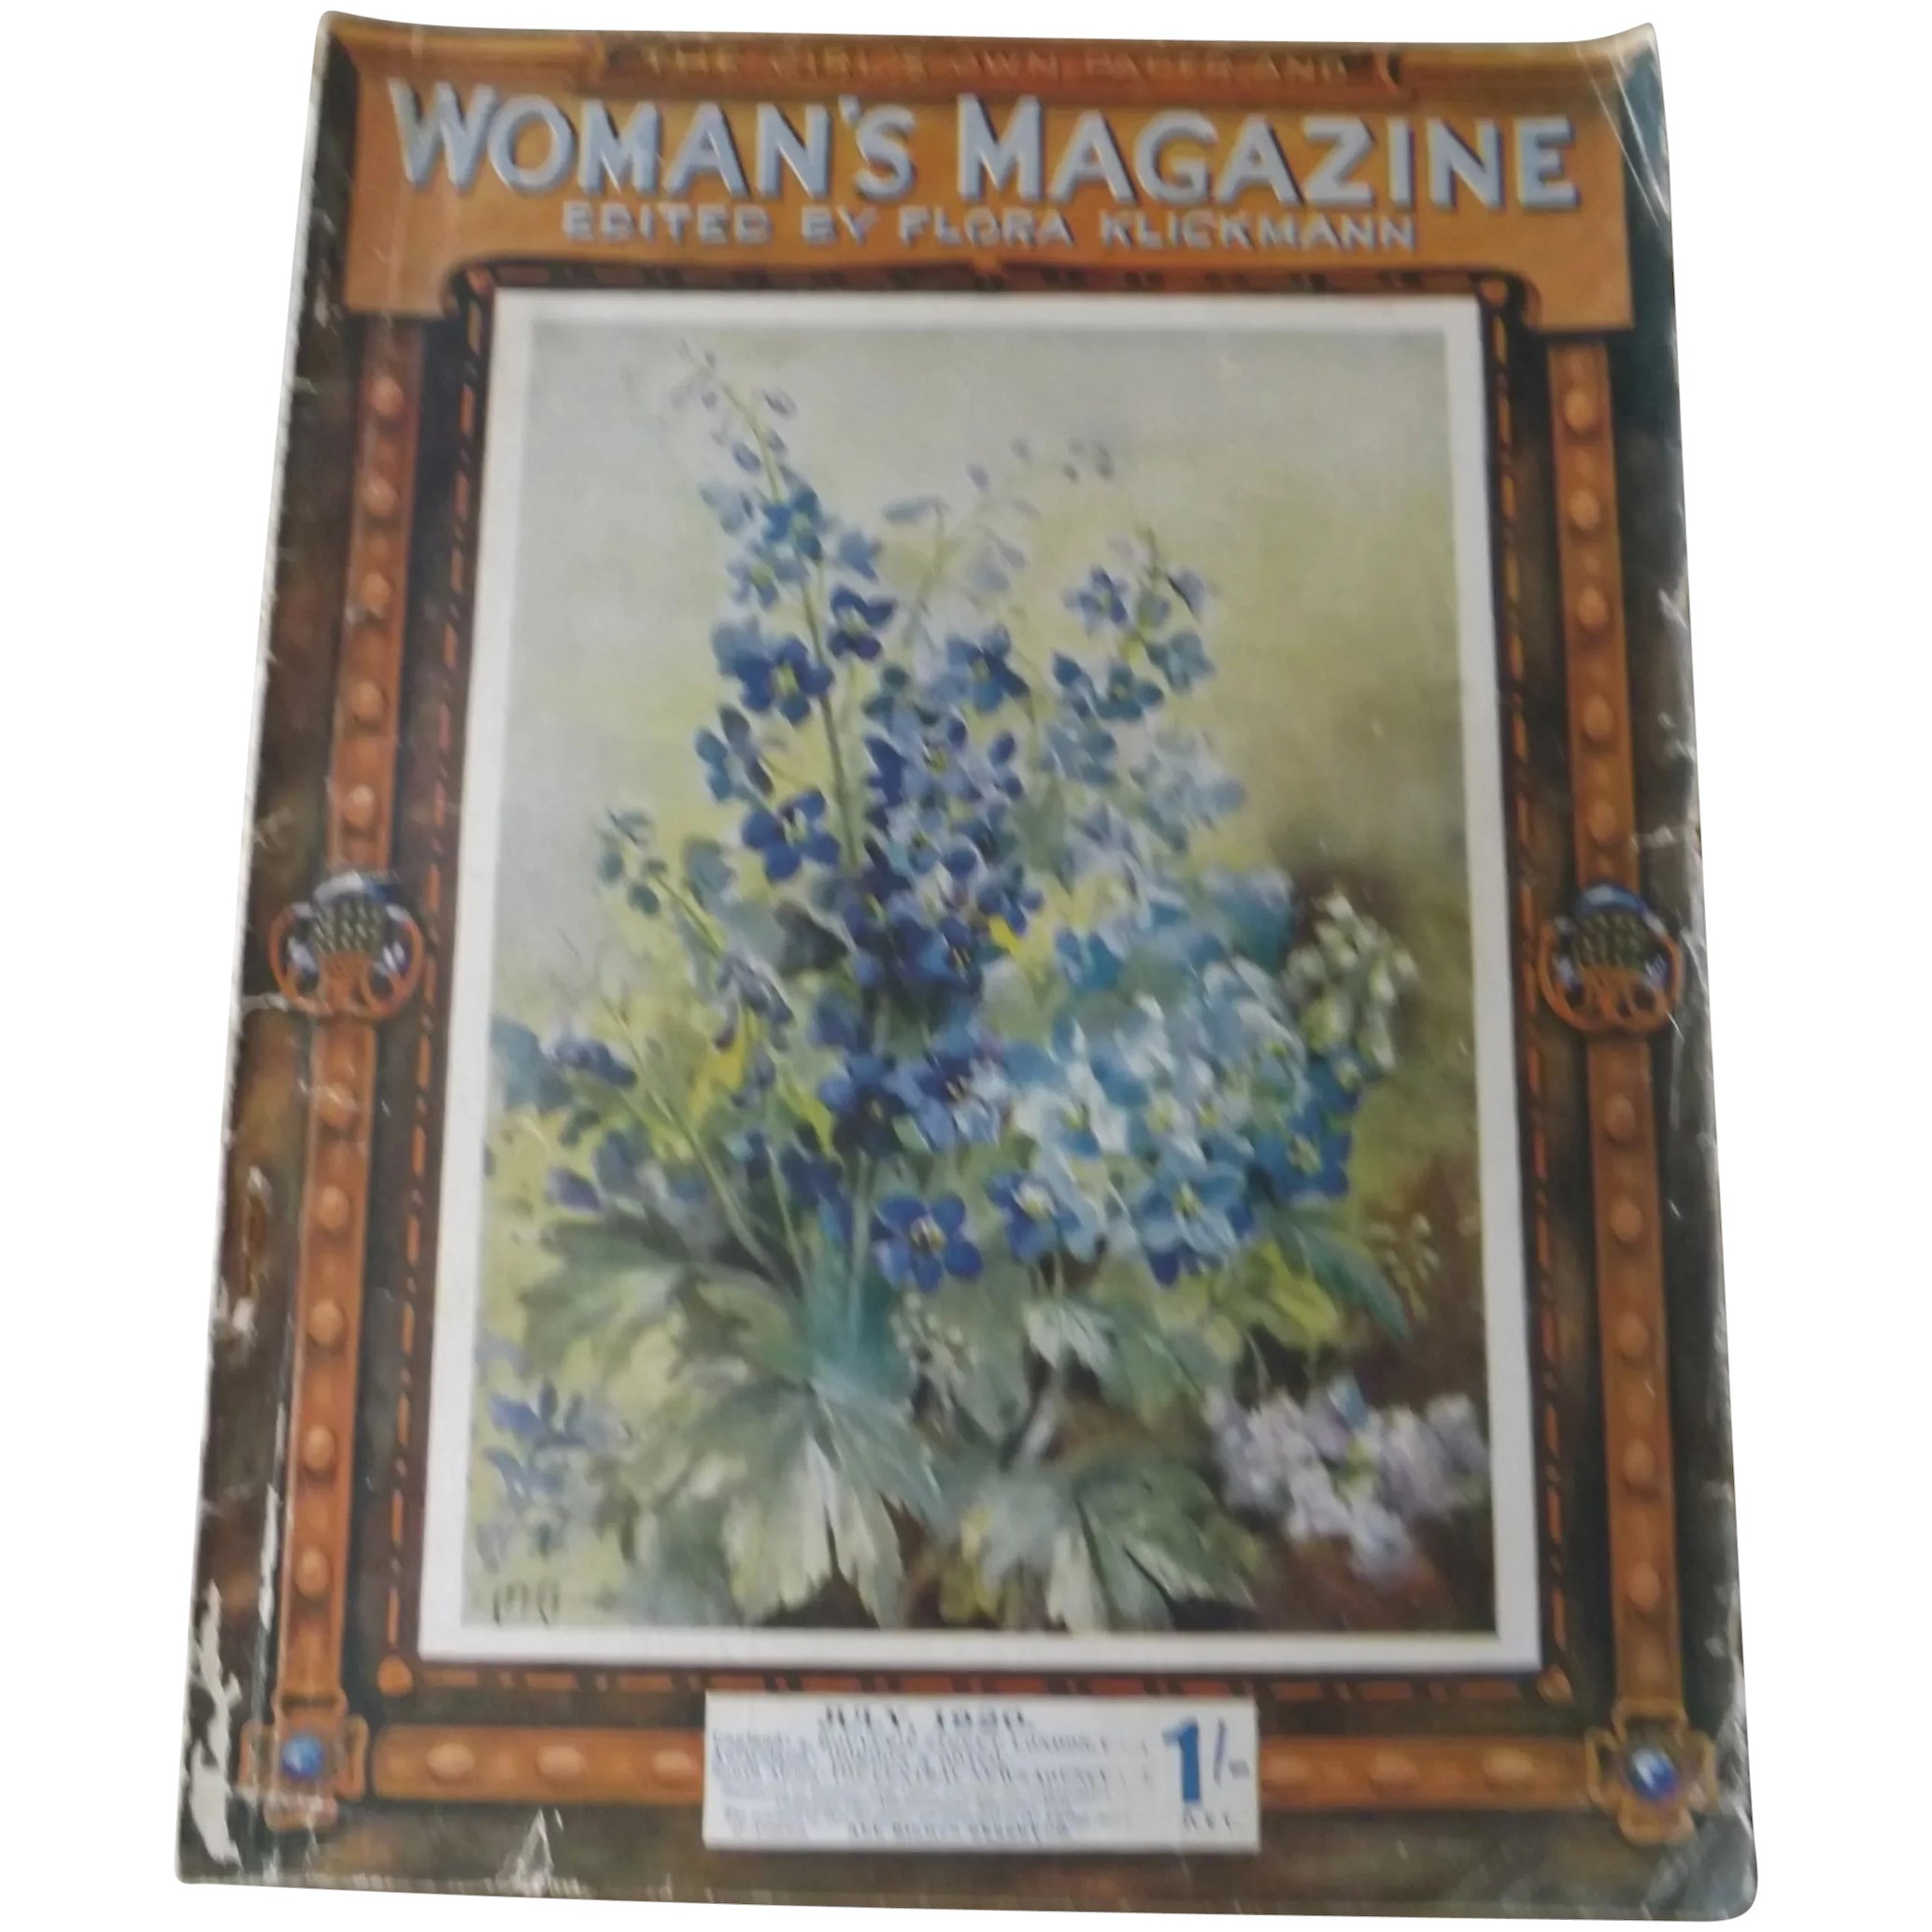 The Girls Own Paper & Woman's Magazine - Great Britain July 1920